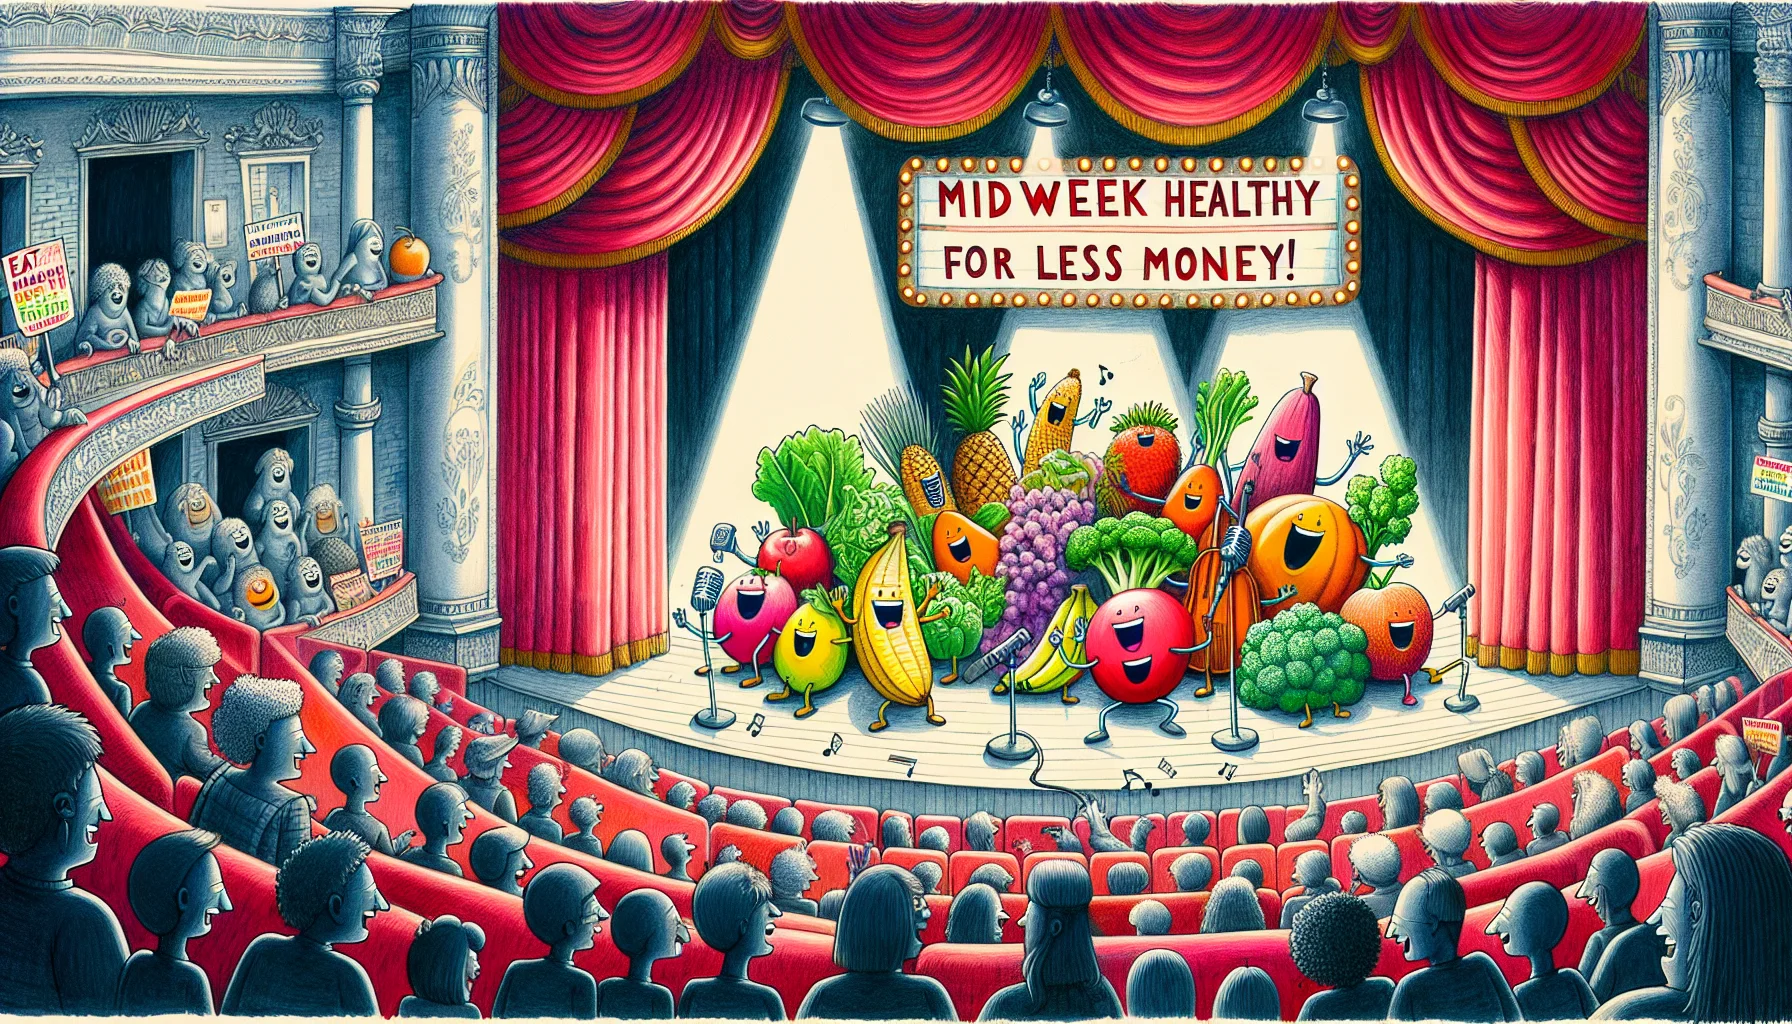 Draw a humorous and realistic scene to represent a 'Midweek Health and Wellness Update'. In this scene, depict a variety of inexpensive fruits and vegetables dramatically performing a musical on stage, with a lively audience of different foods. The fruits and vegetables should be singing about their respective health benefits and affordability. Include people of mixed descents and genders as spectators, laughing and enjoying the show. The setting should be a traditional theater with balconies, lush red curtains, and an elaborate stage, lit by an old-world chandelier. The billboard at the theater entrance proudly declares 'Eat healthy for less money!'